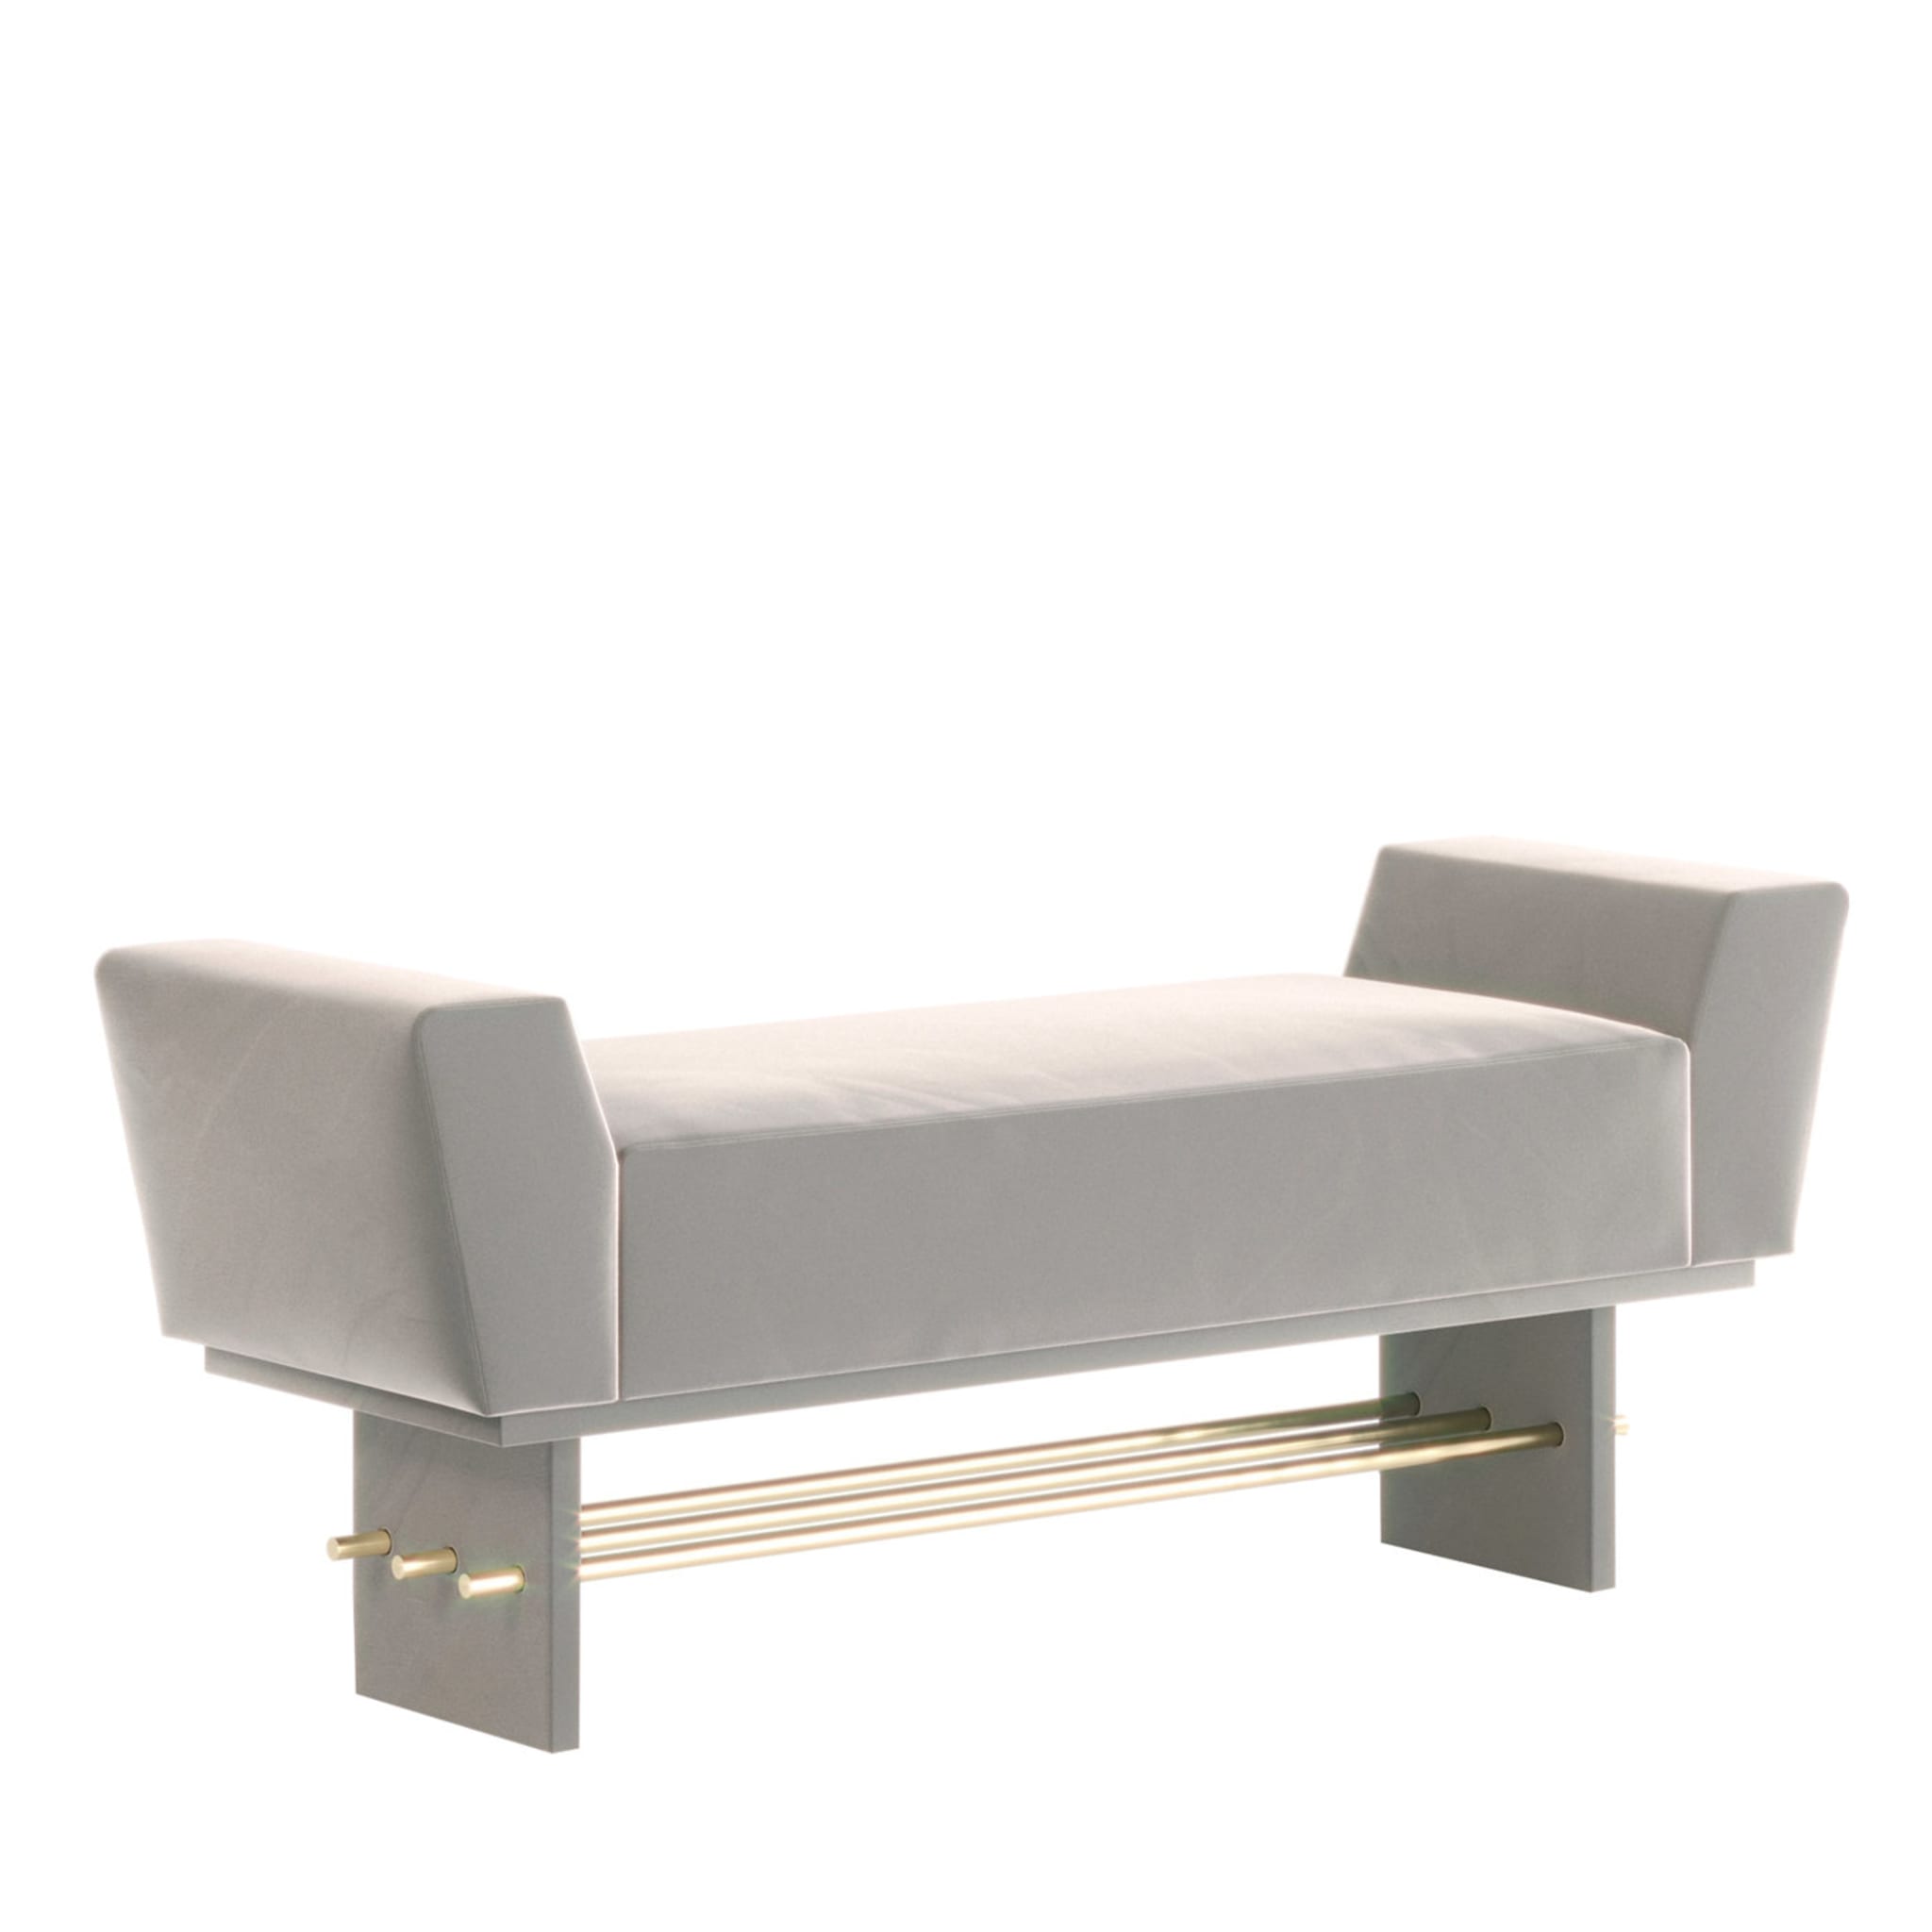 Benedict Bench by Giannella Ventura - Main view